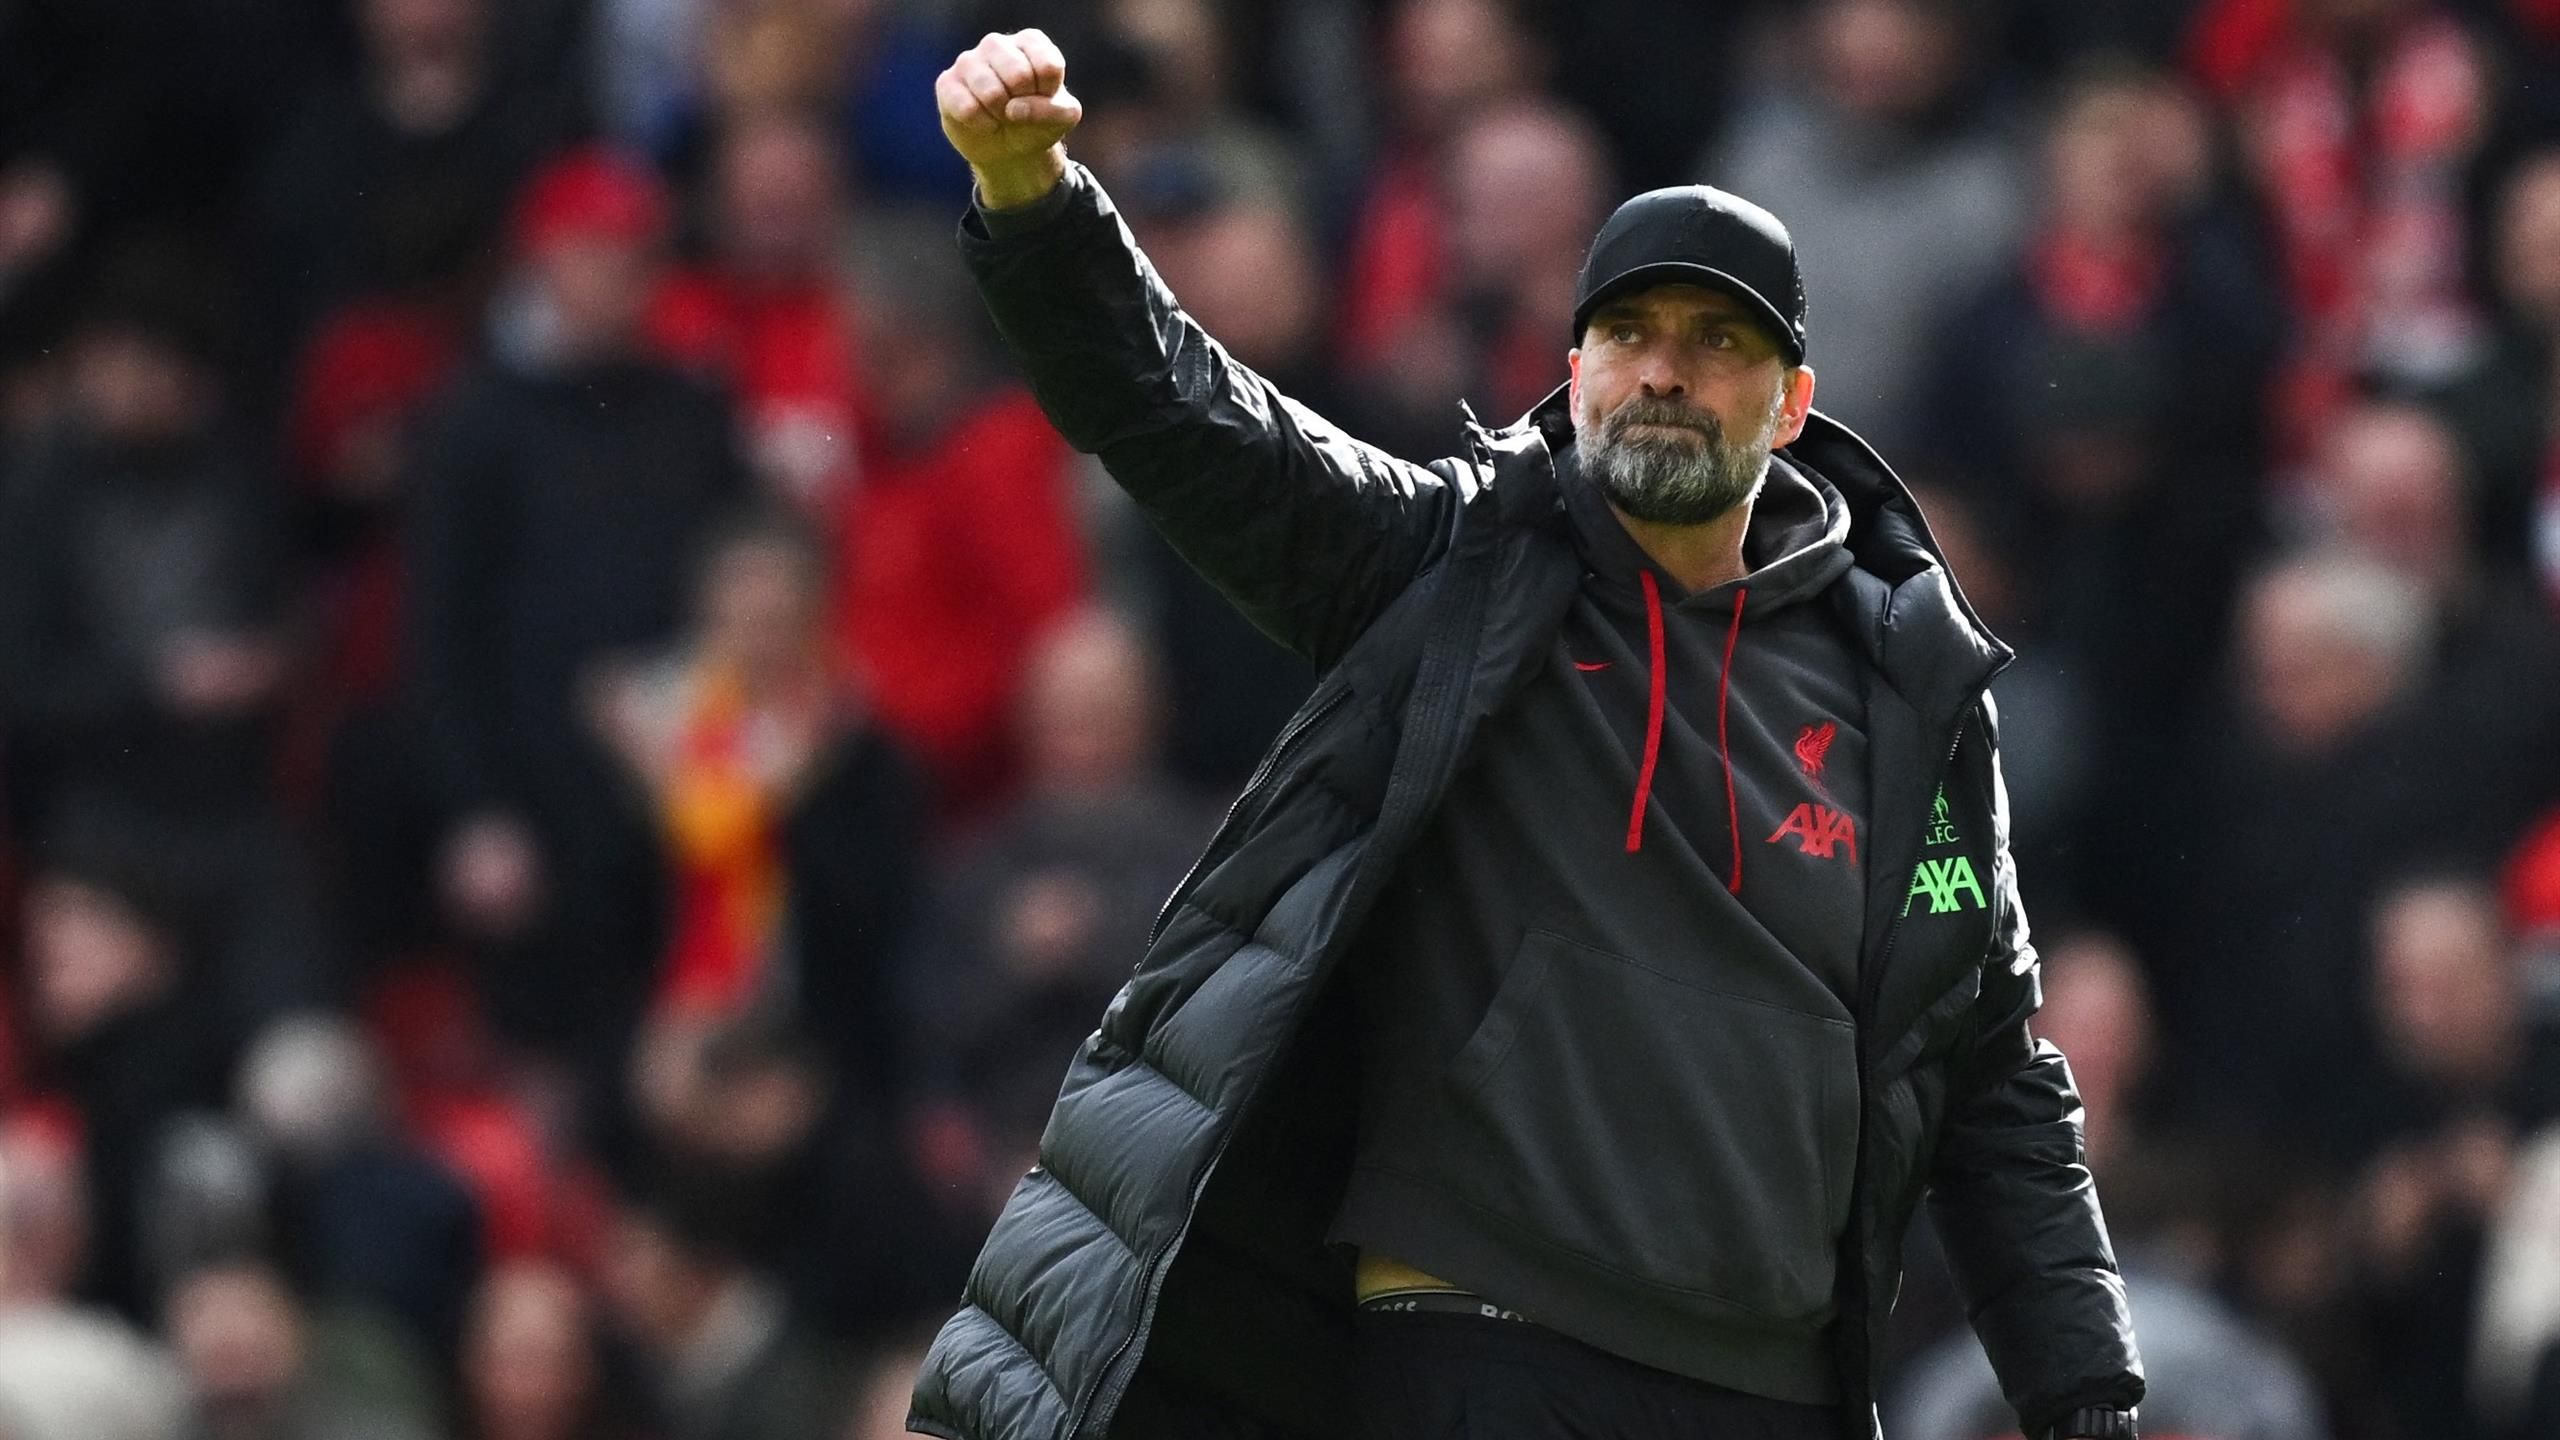 Tips for watching Klopp's final match at Anfield. - 2. Preview of Klopp's Final Anfield Match